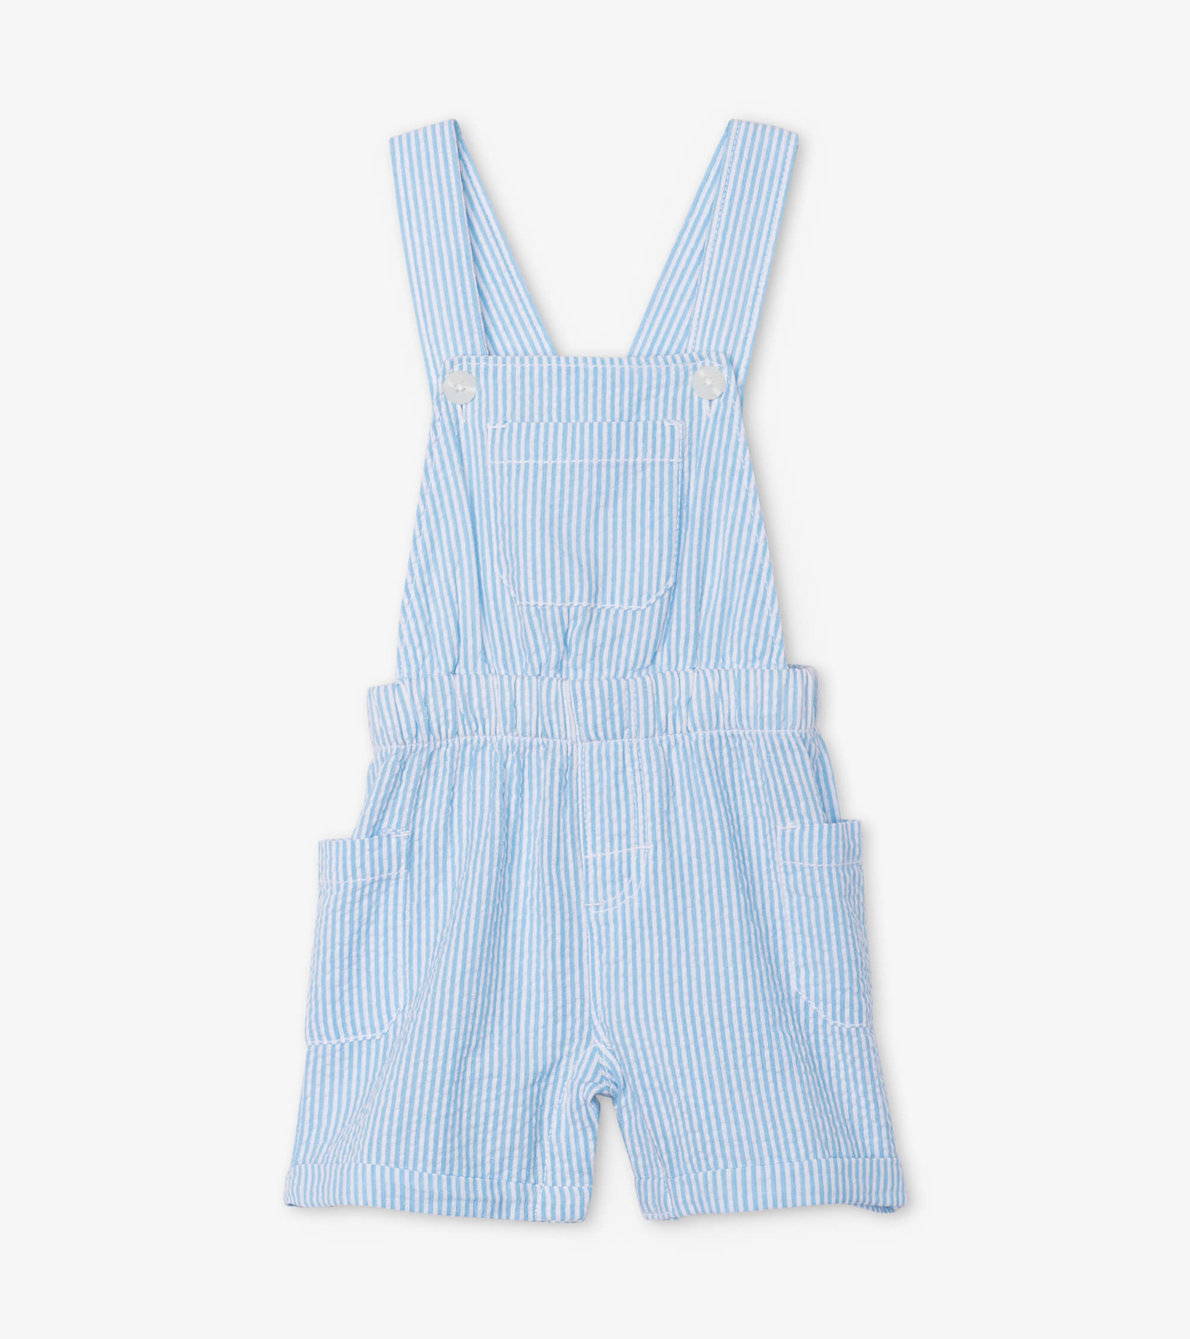 View larger image of Blue Stripe Baby Shortall